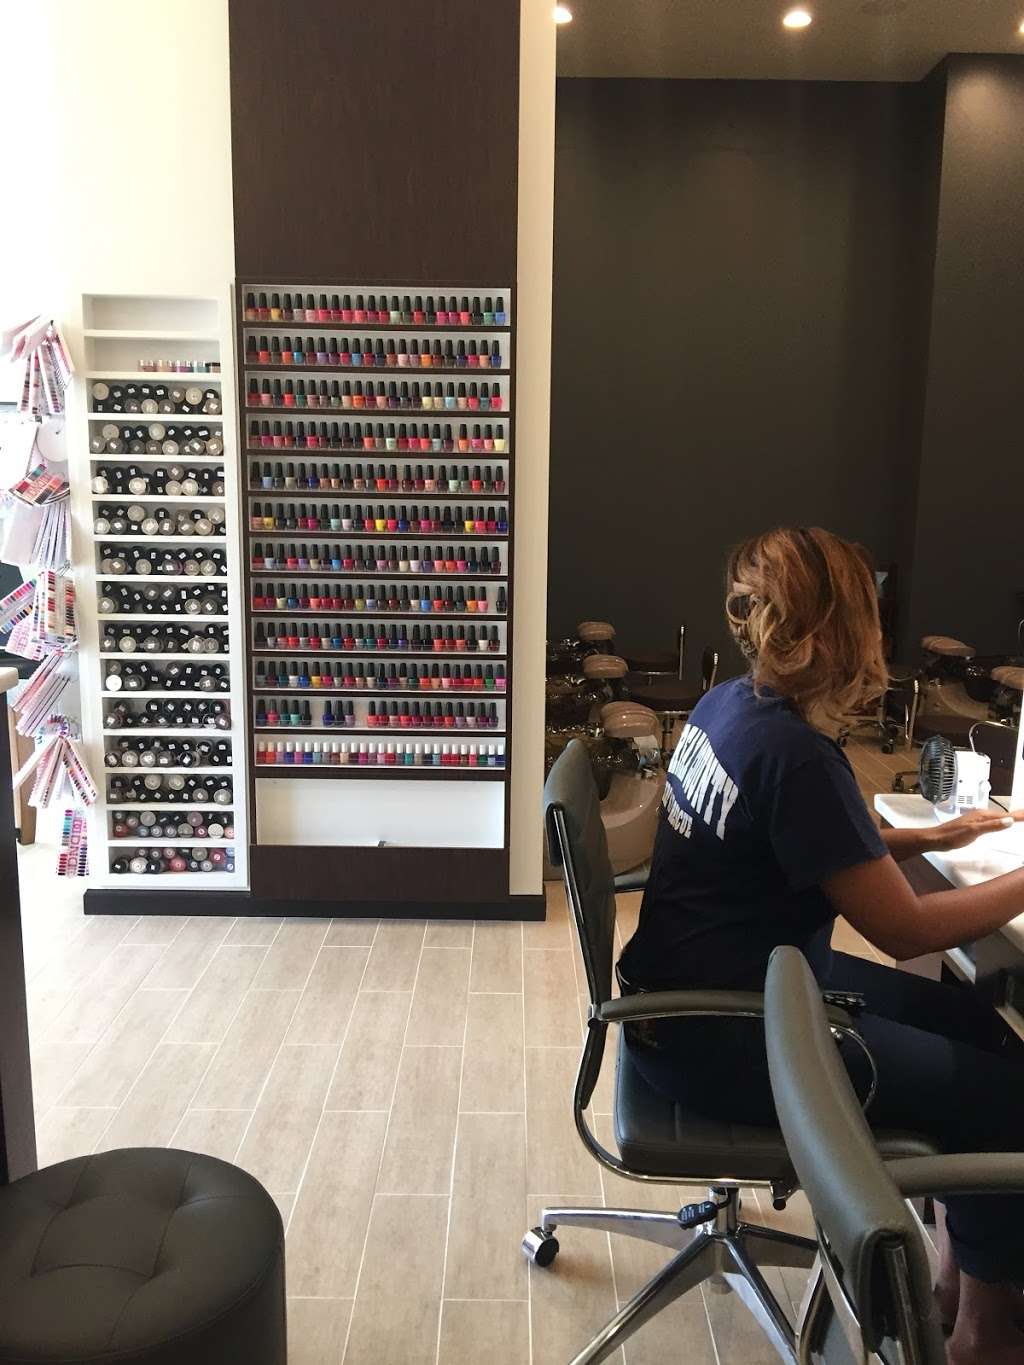 Sparenity The Nail Lounge | 16108 Cadillac Dr, Brandywine, MD 20613 | Phone: (301) 683-8000